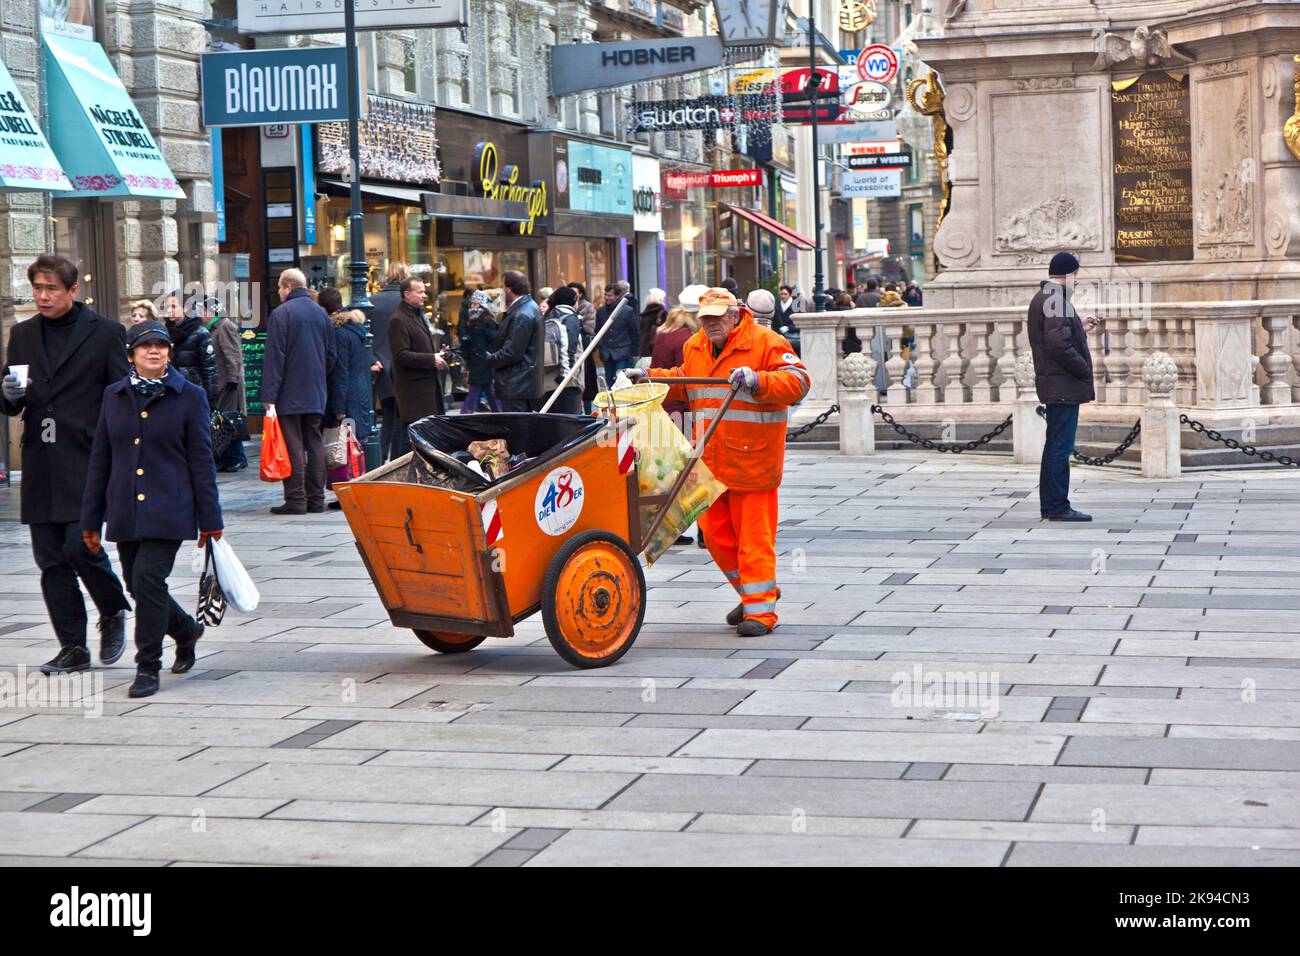 VIENNA, AUSTRIA - NOV 26: man cleaning the street at  Graben shopping area on November 26,2010 in Vienna, Austria. The Graben traces its origin back t Stock Photo